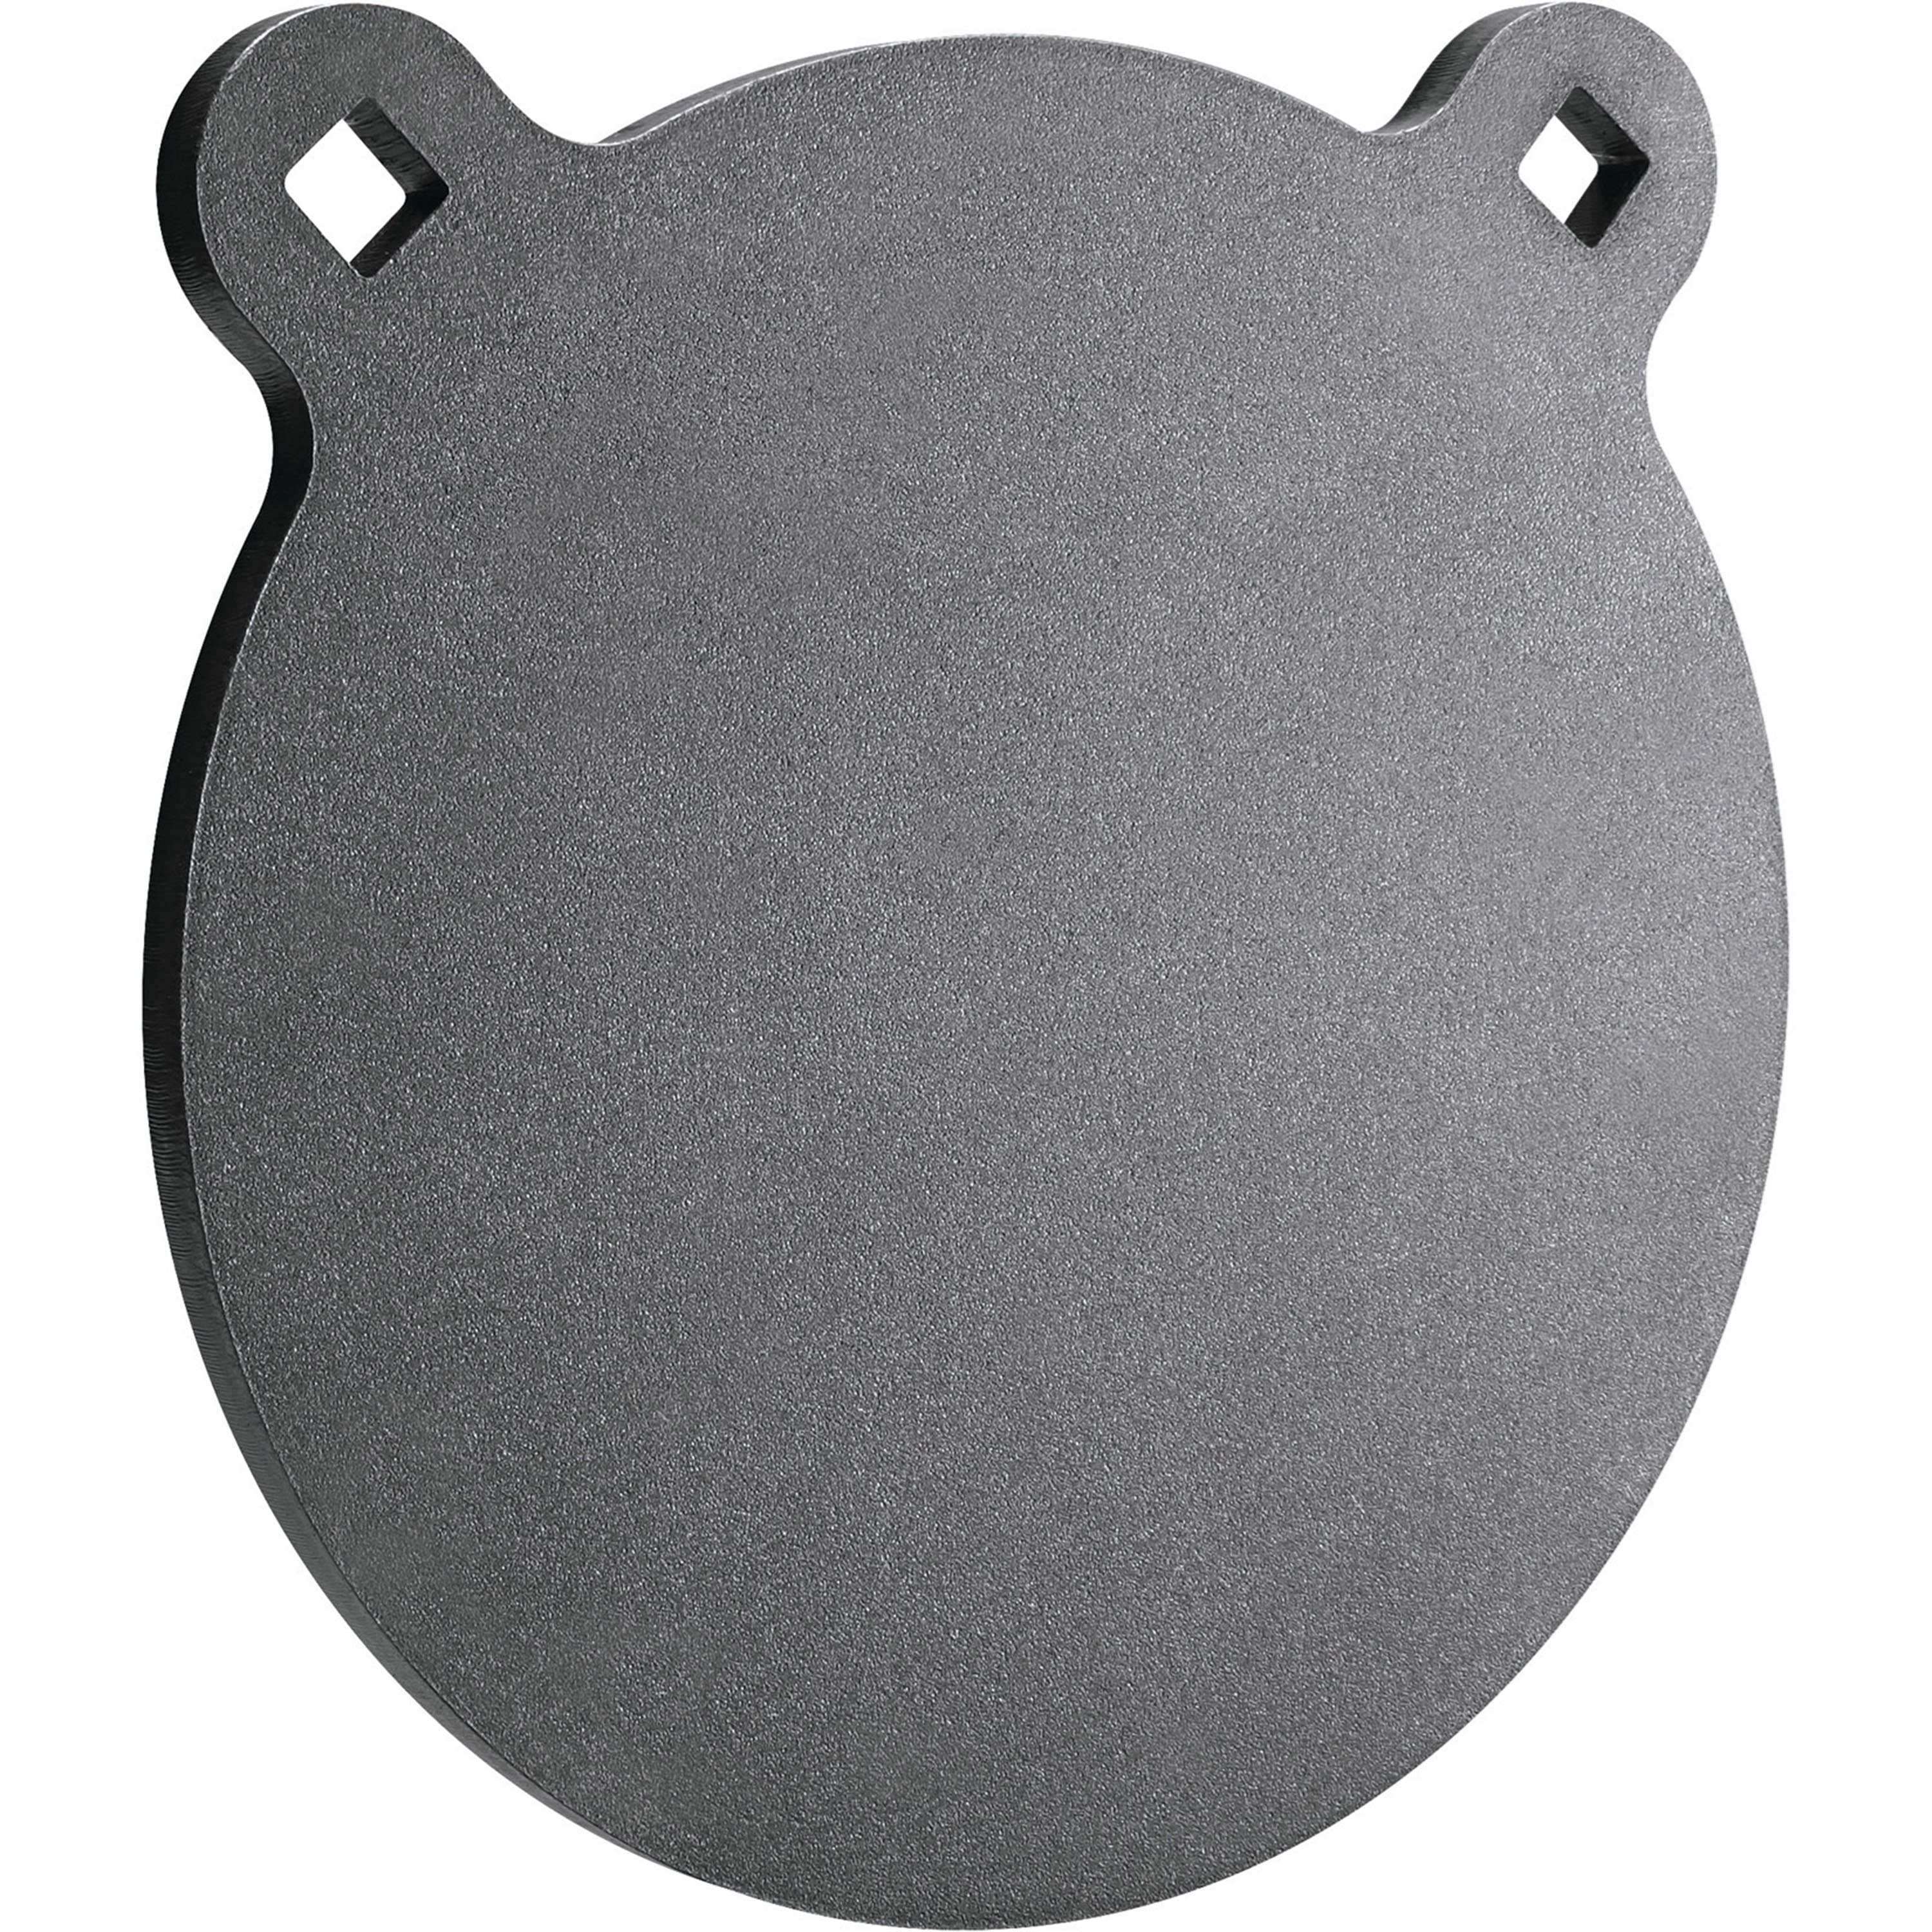 AR500 Steel Target 1/4" IPSC 8" x 12" MADE IN THE USA! 